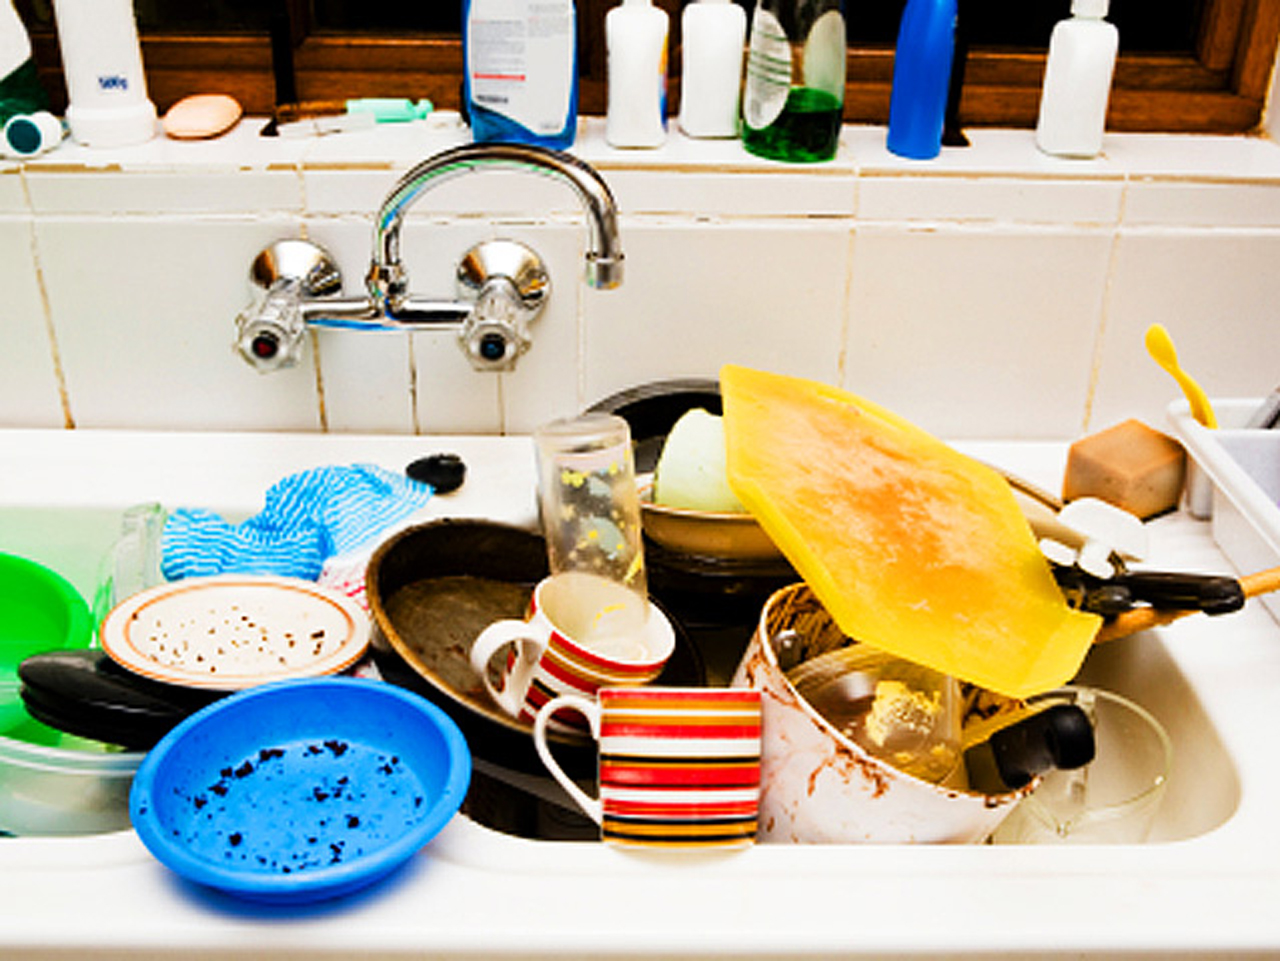 Kitchen Hygiene Tips: How To Clean Dish Cloths And Keep Germs At Bay, Health News